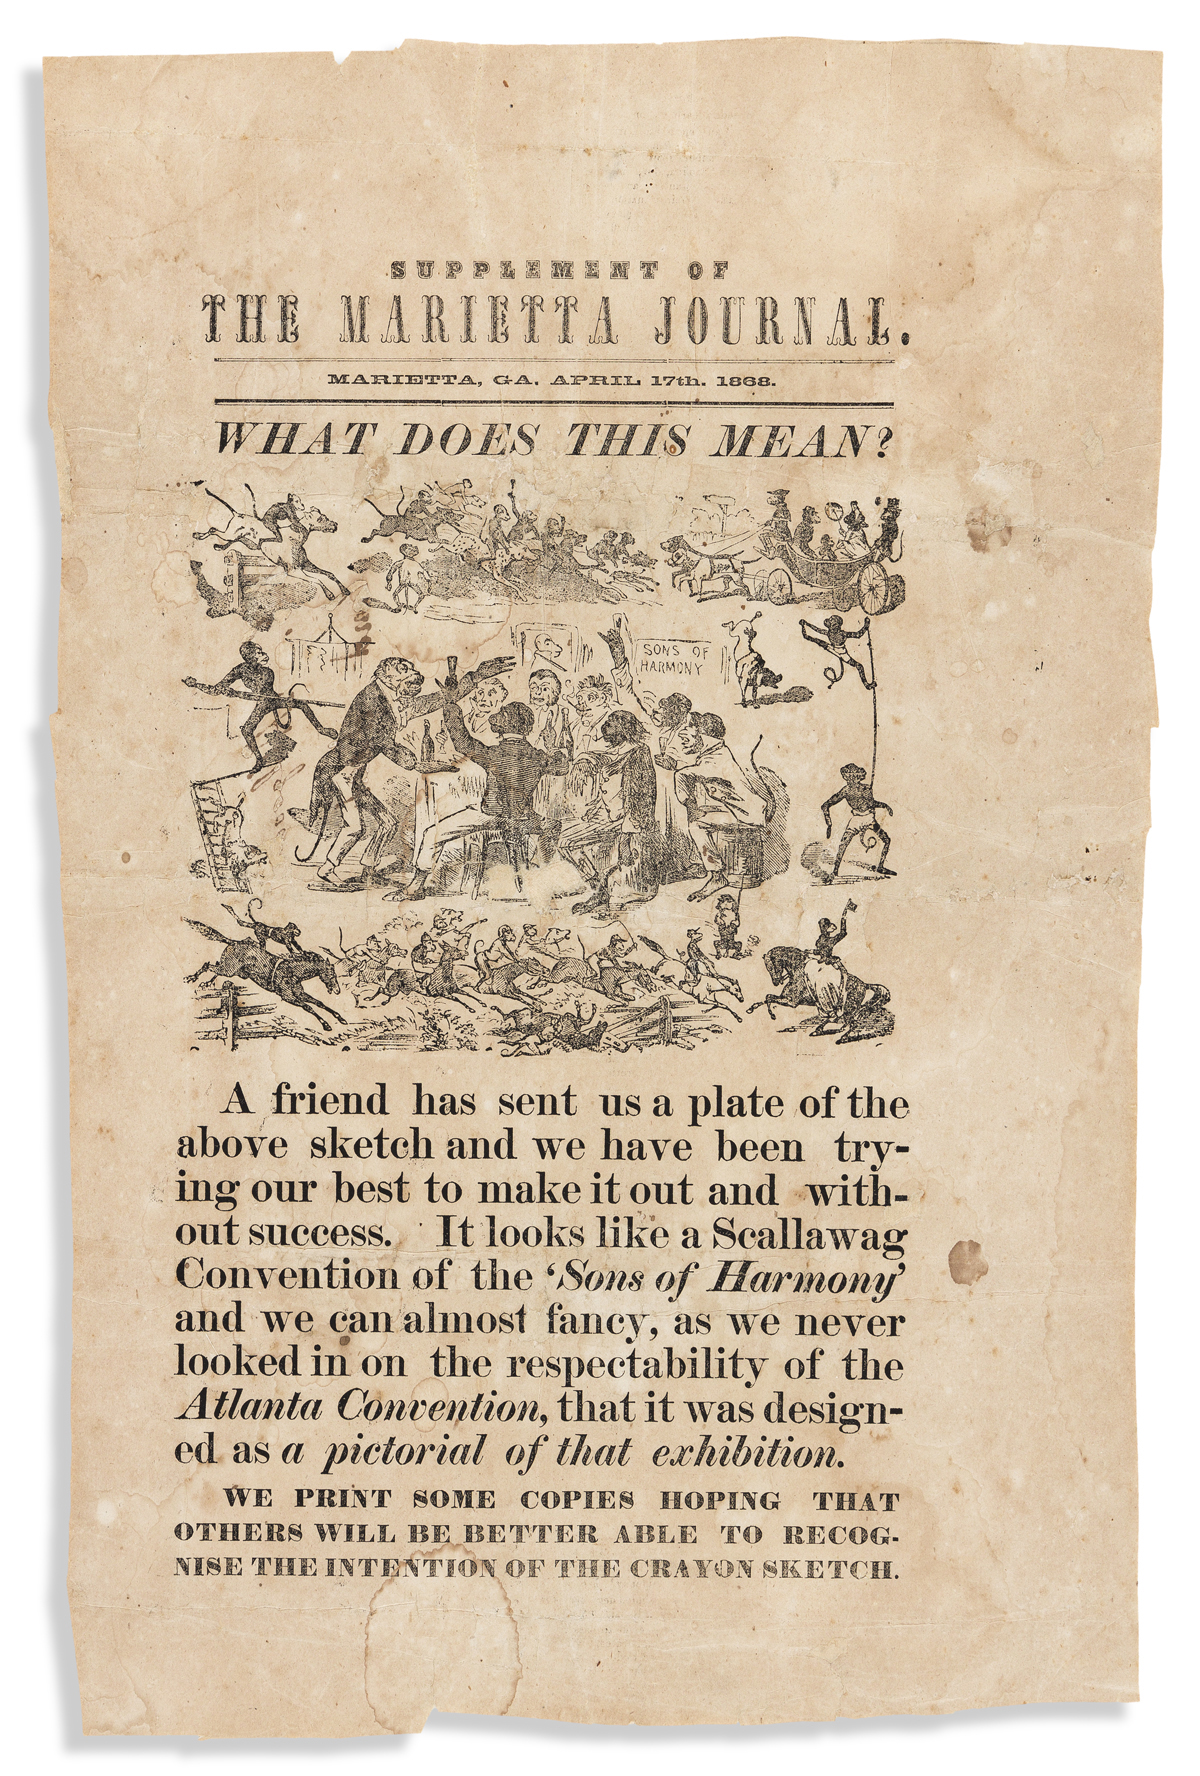 (RECONSTRUCTION.) Supplement of the Marietta Journal: What Does This Mean?